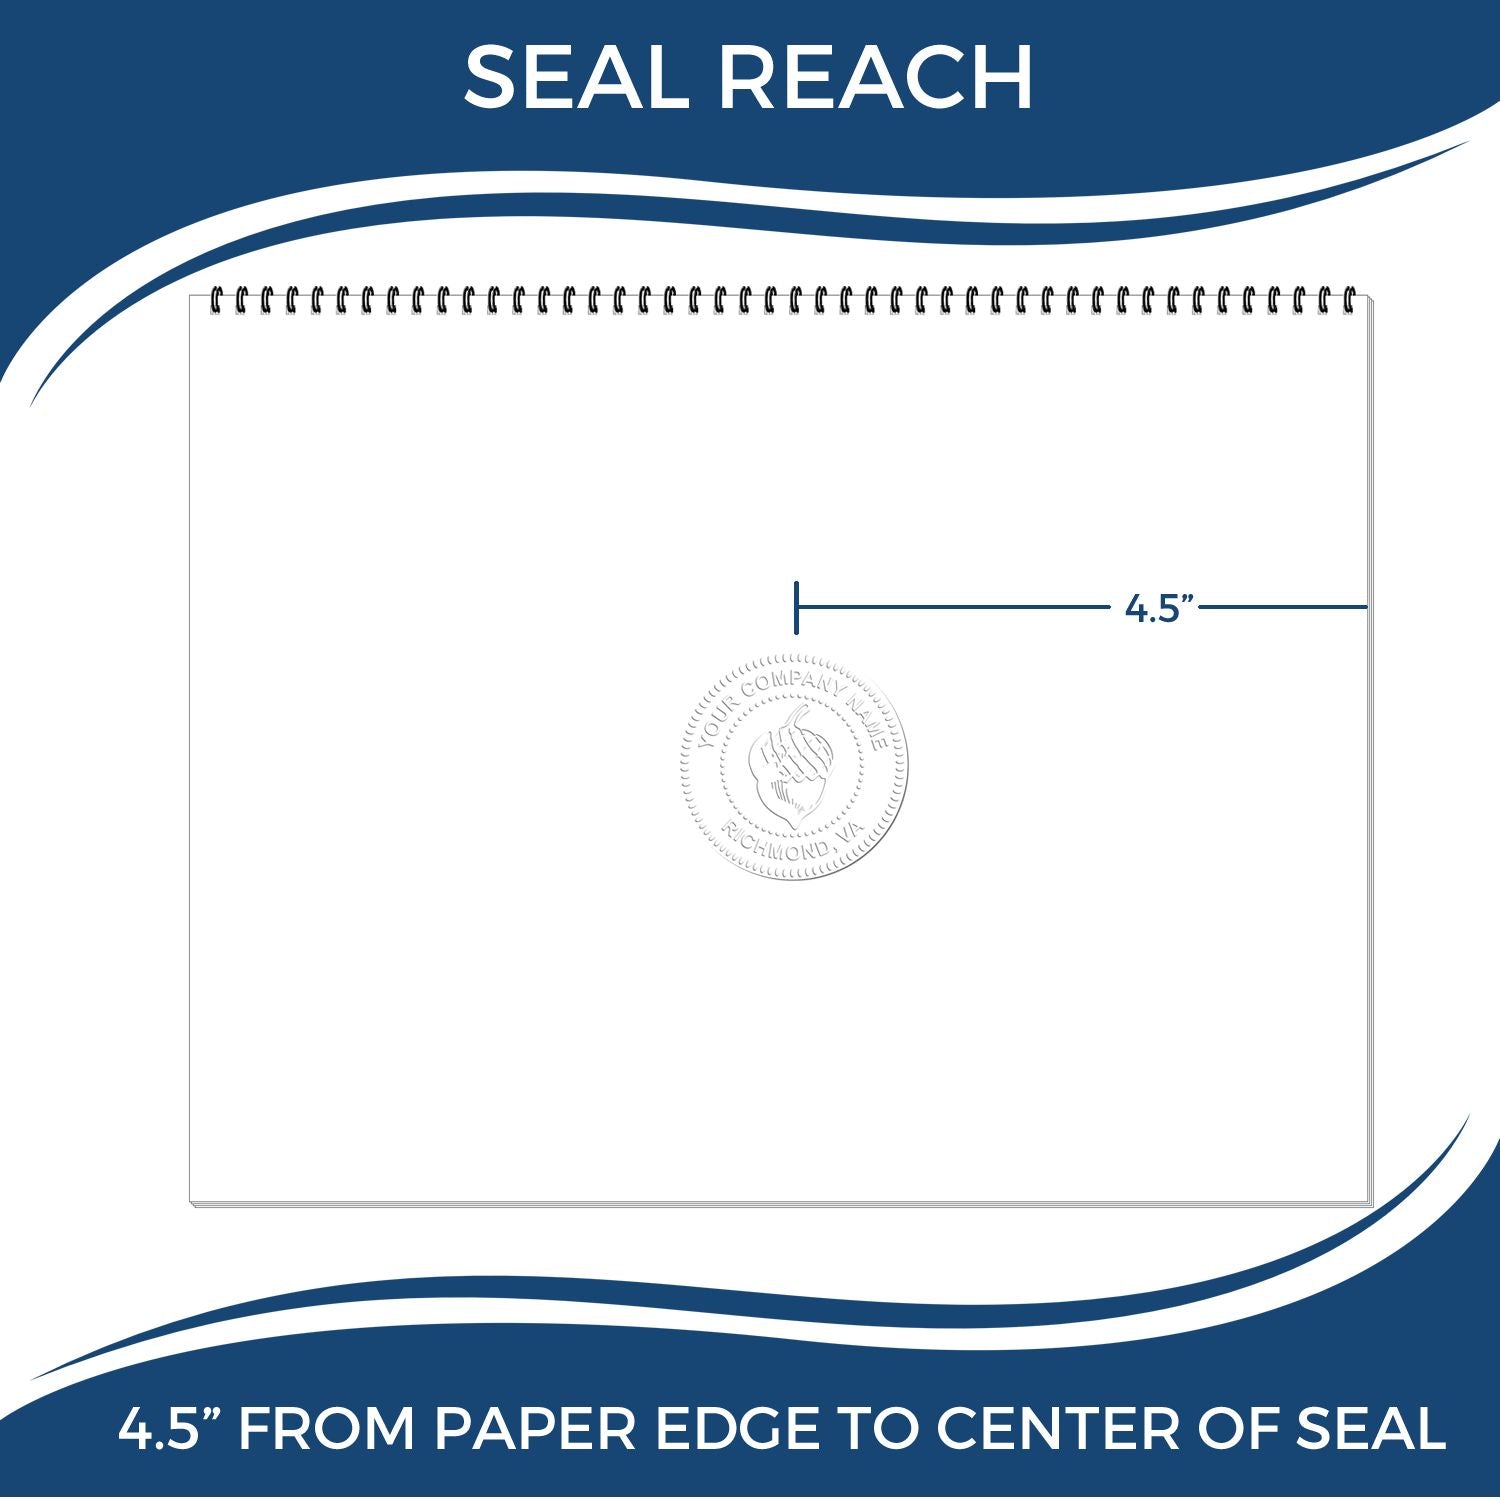 An infographic showing the seal reach which is represented by a ruler and a miniature seal image of the State of Connecticut Extended Long Reach Landscape Architect Seal Embosser